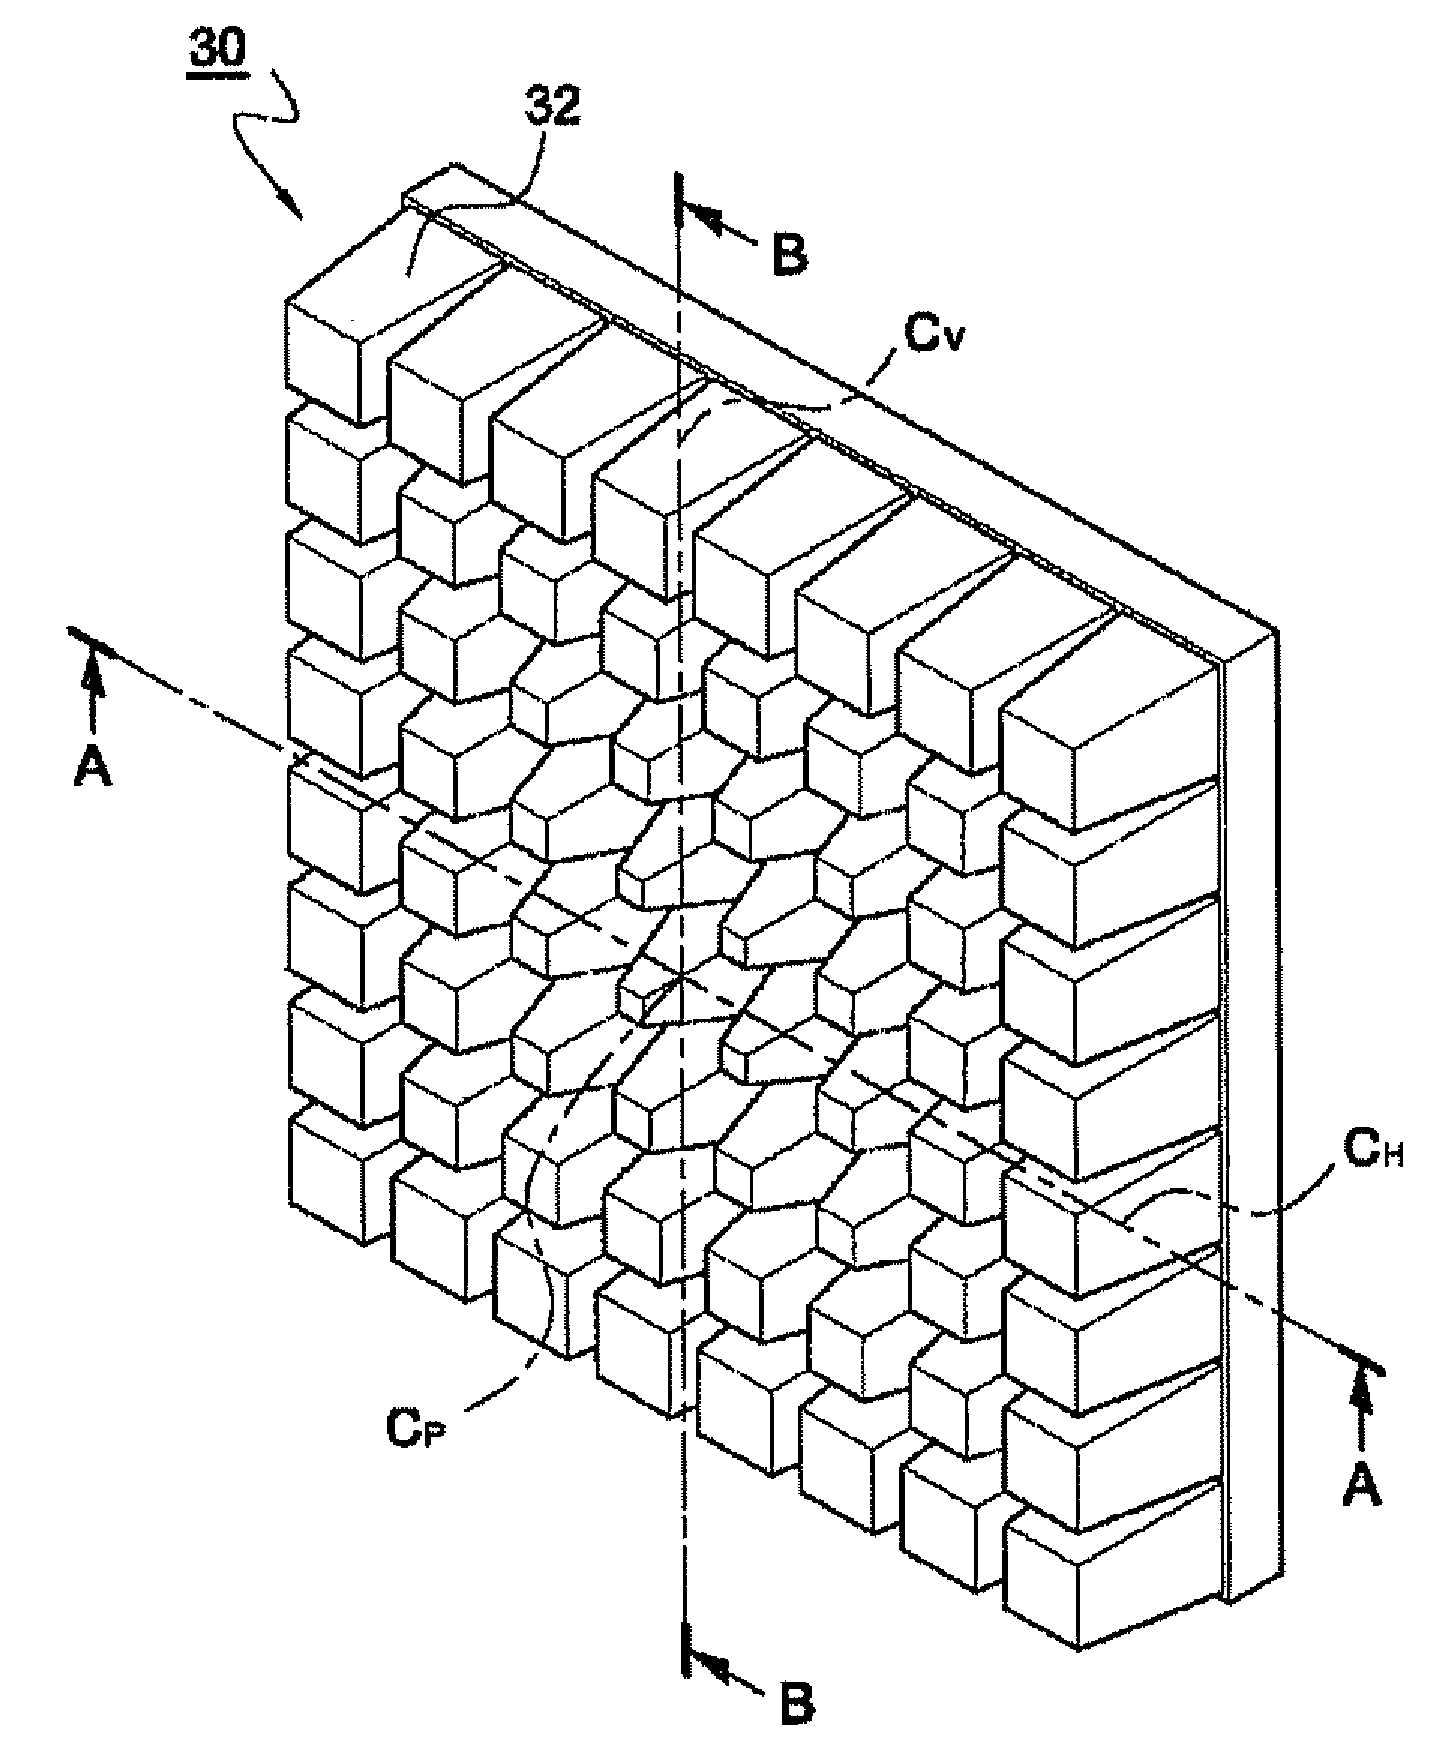 Display Device Uniforming Light Distribution Throughout Areas and Method for Manufacturing Same